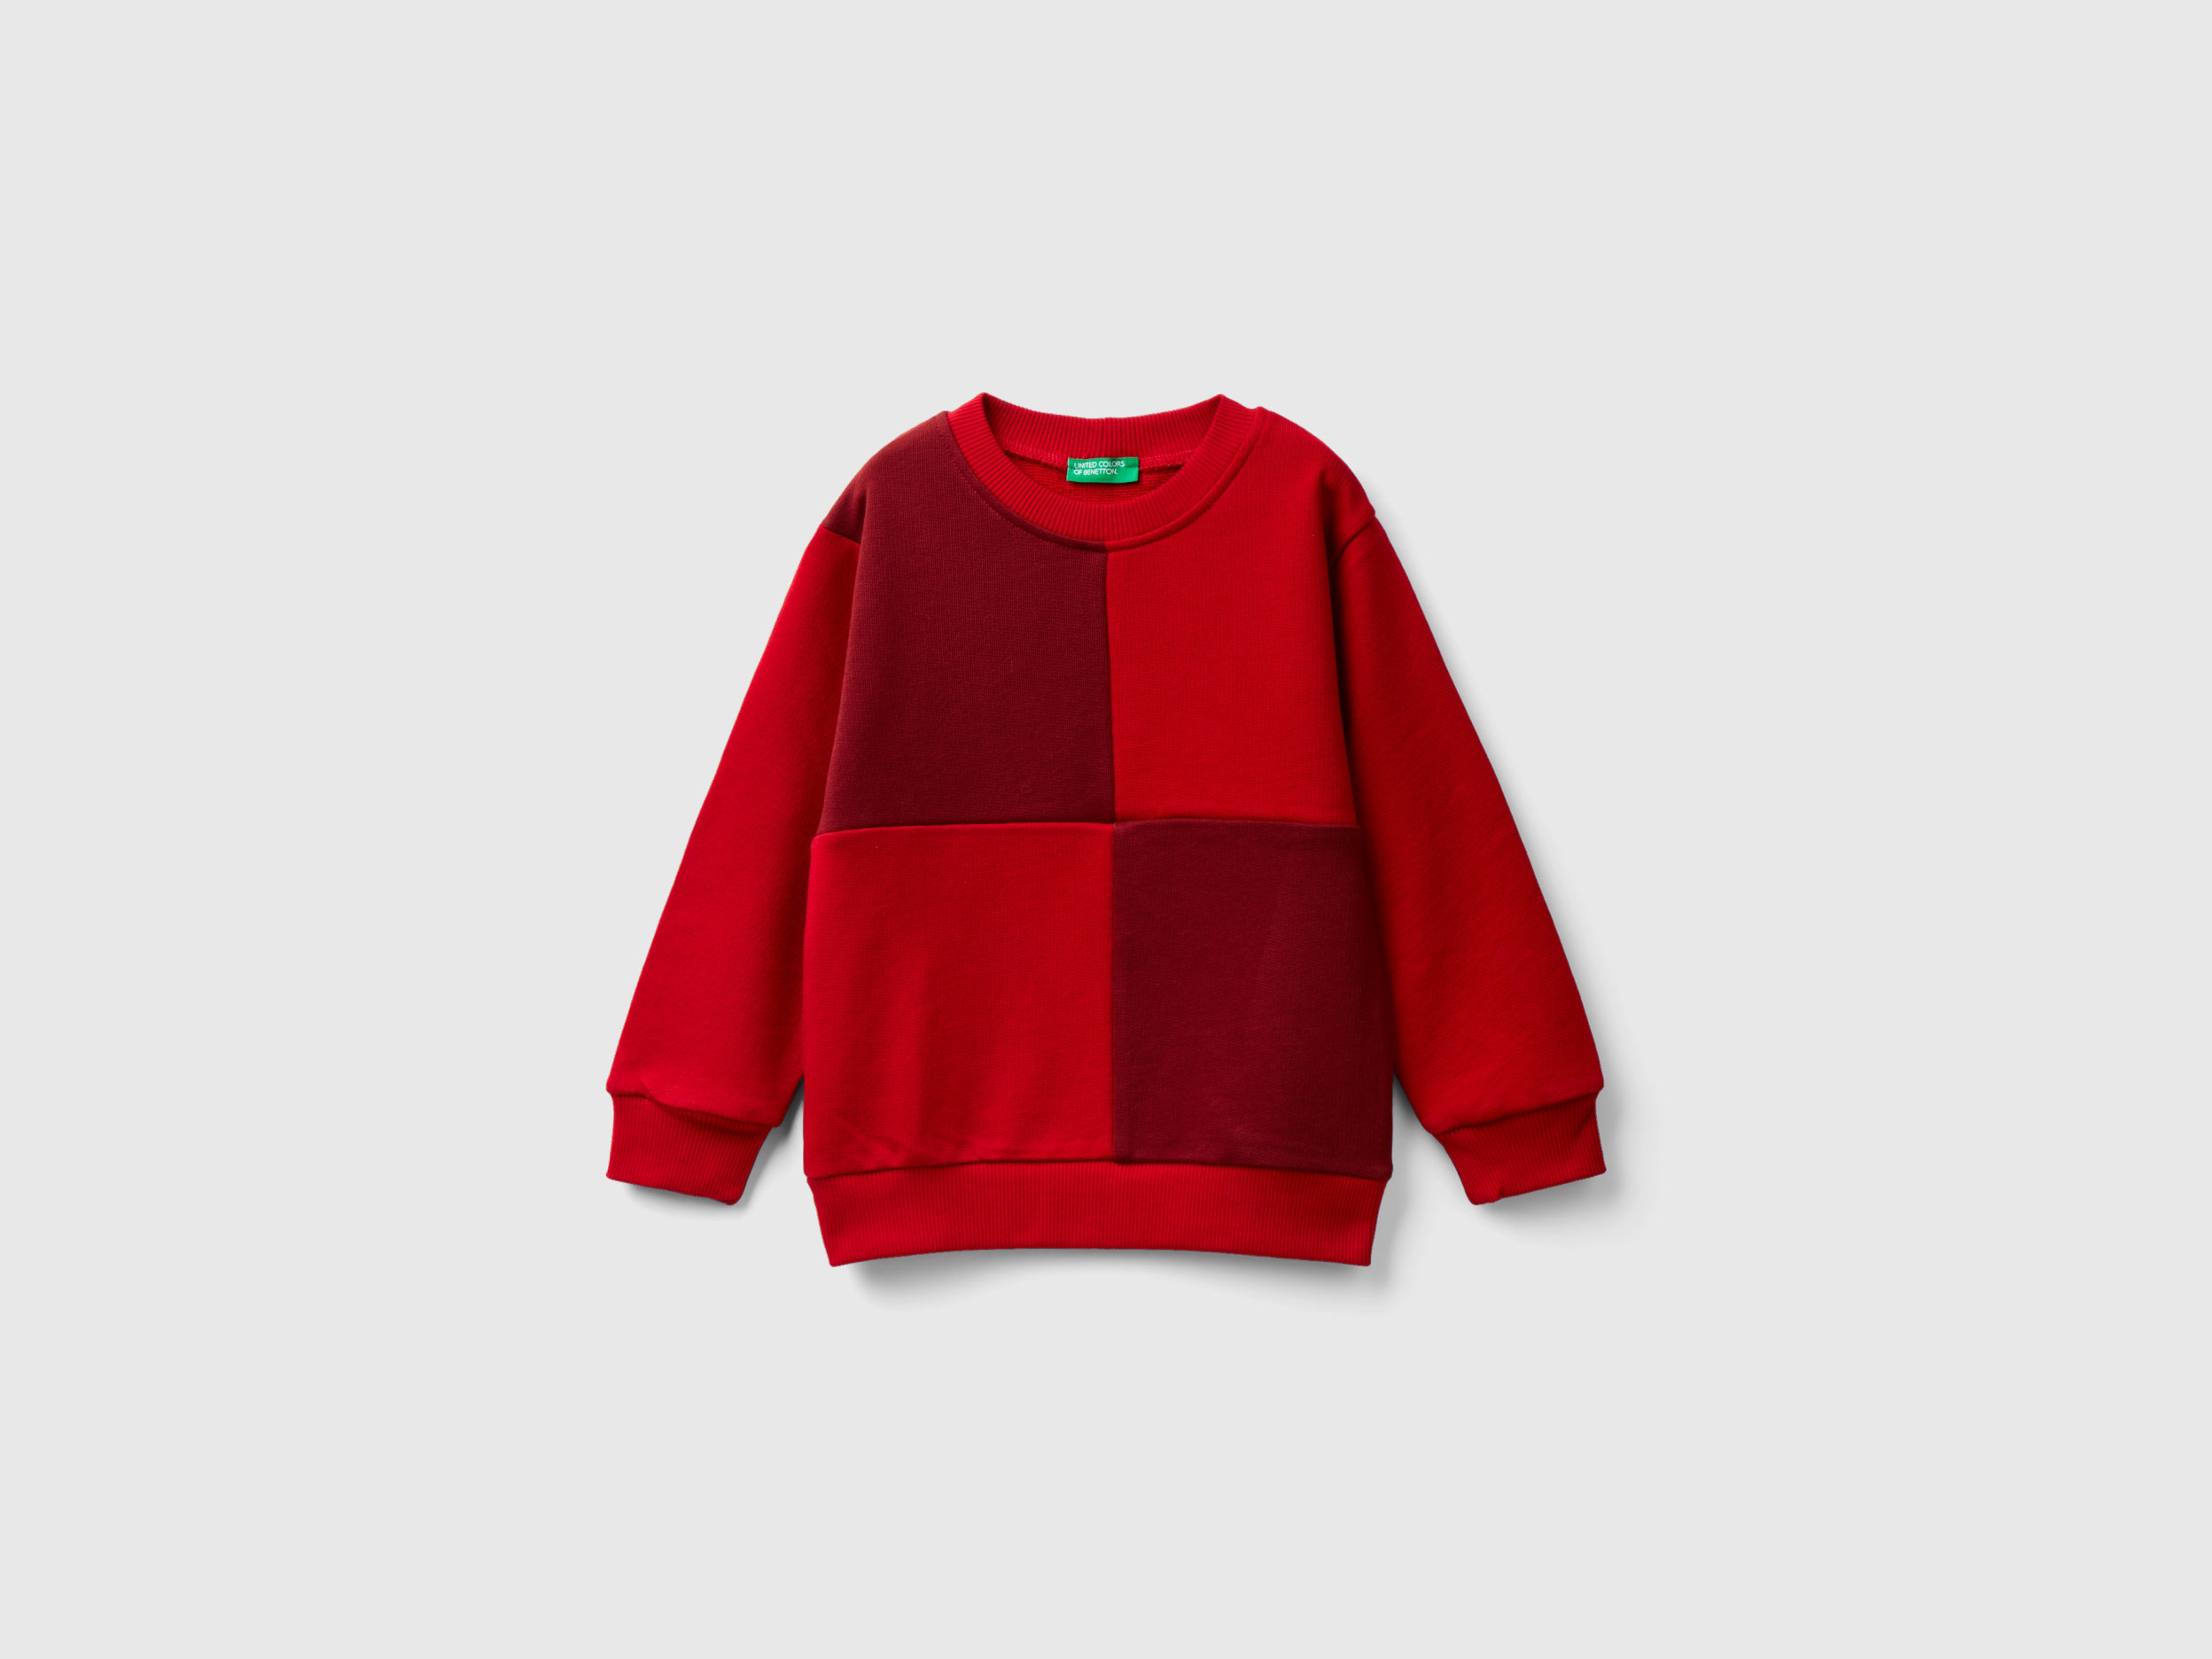 Benetton, Sweatshirt With Maxi Check, size 18-24, Red, Kids